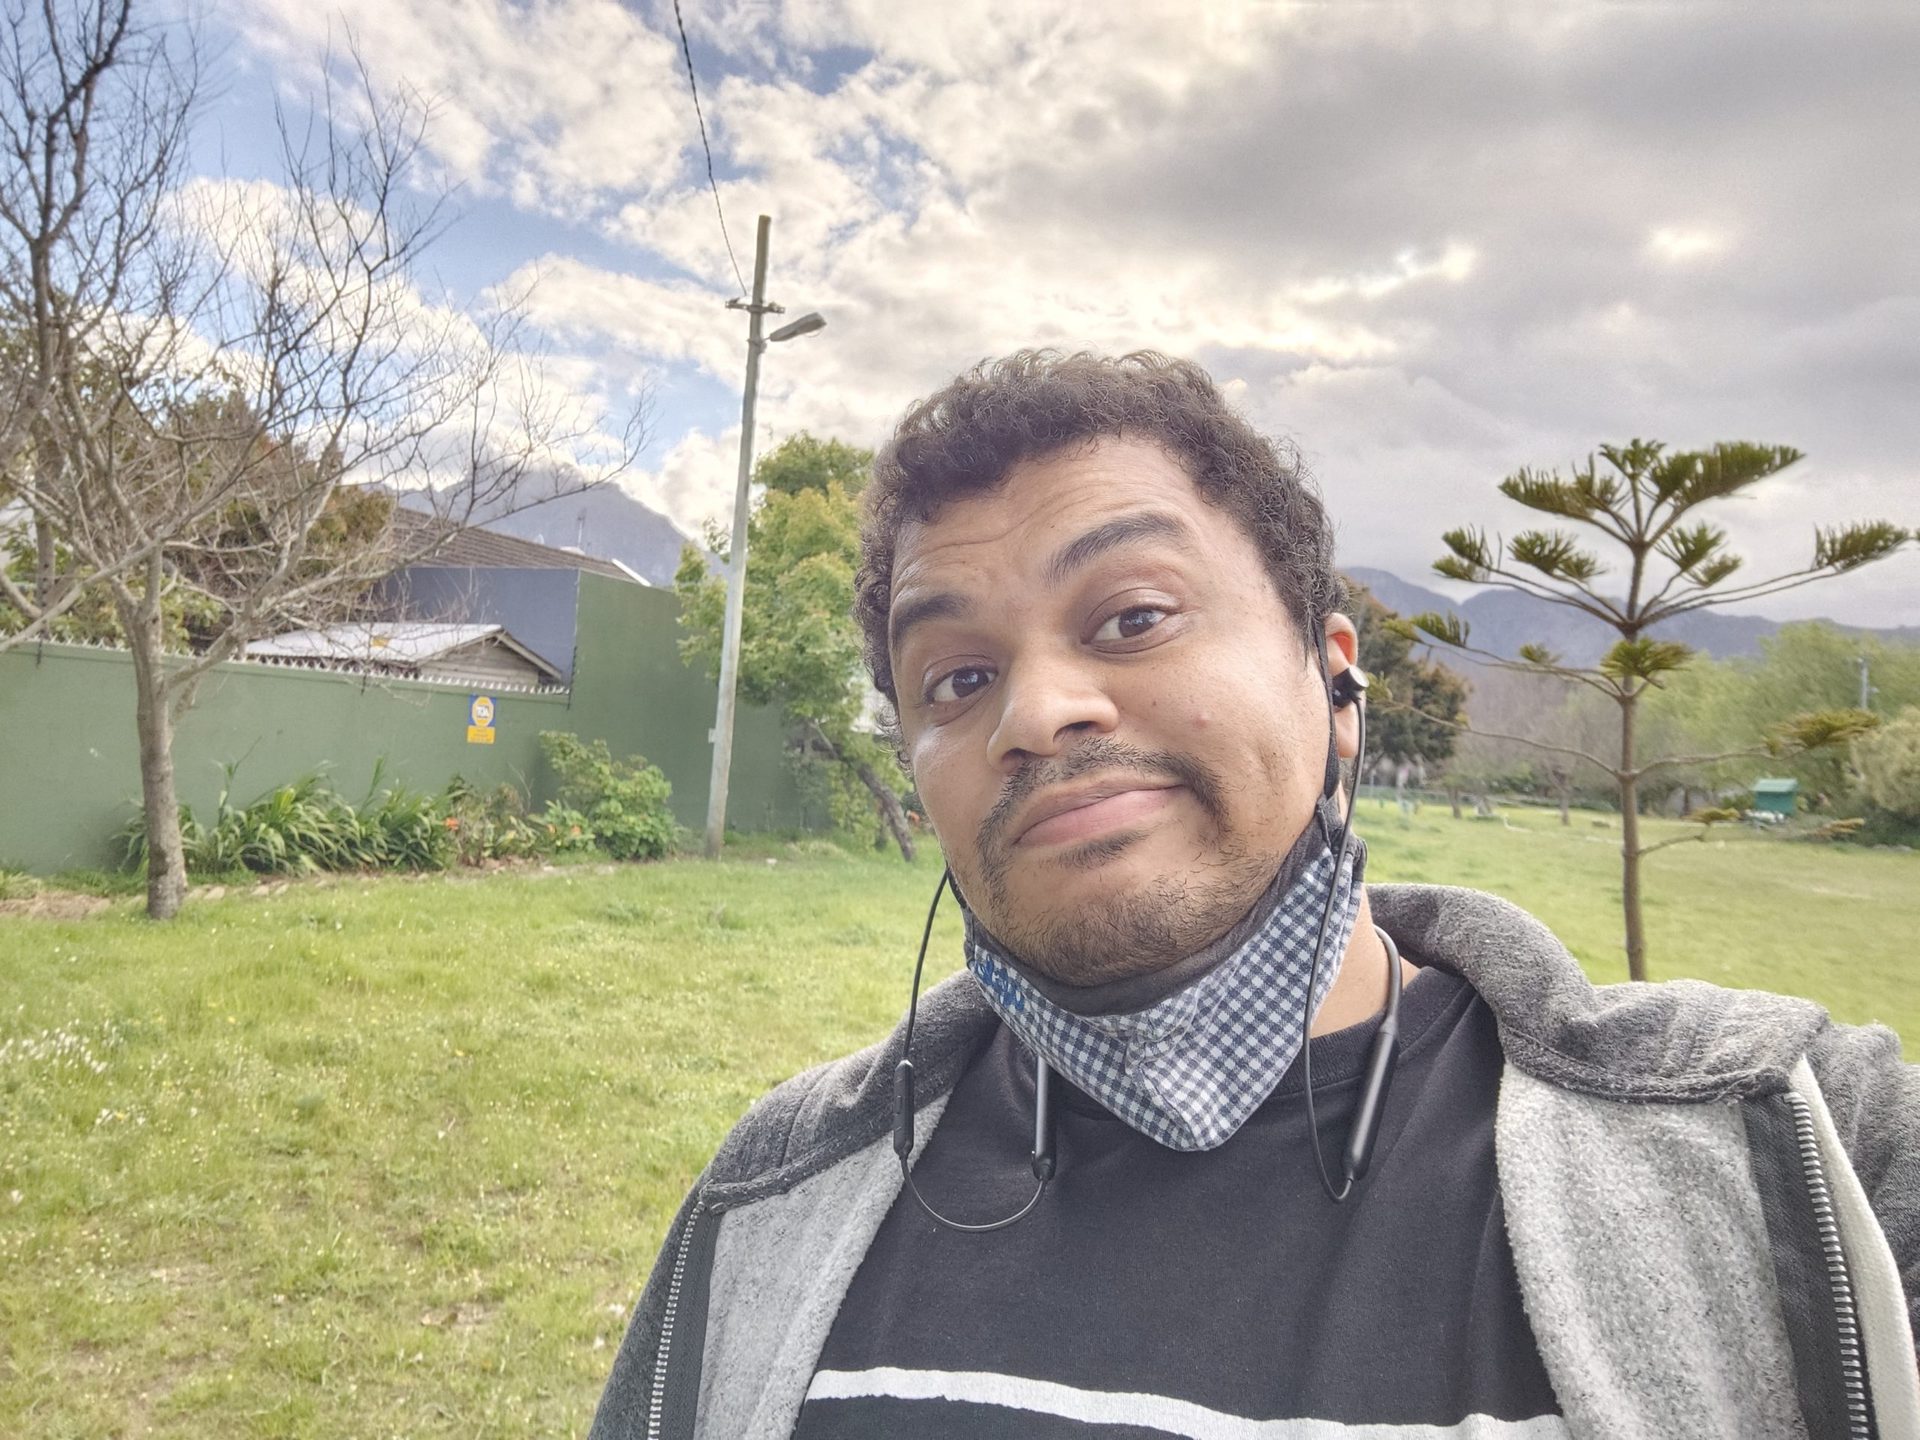 Another Vivo X70 Pro Plus selfie sample of a man with dark hair wearing a face mask down under his chin, in a t-shirt and hoodie.